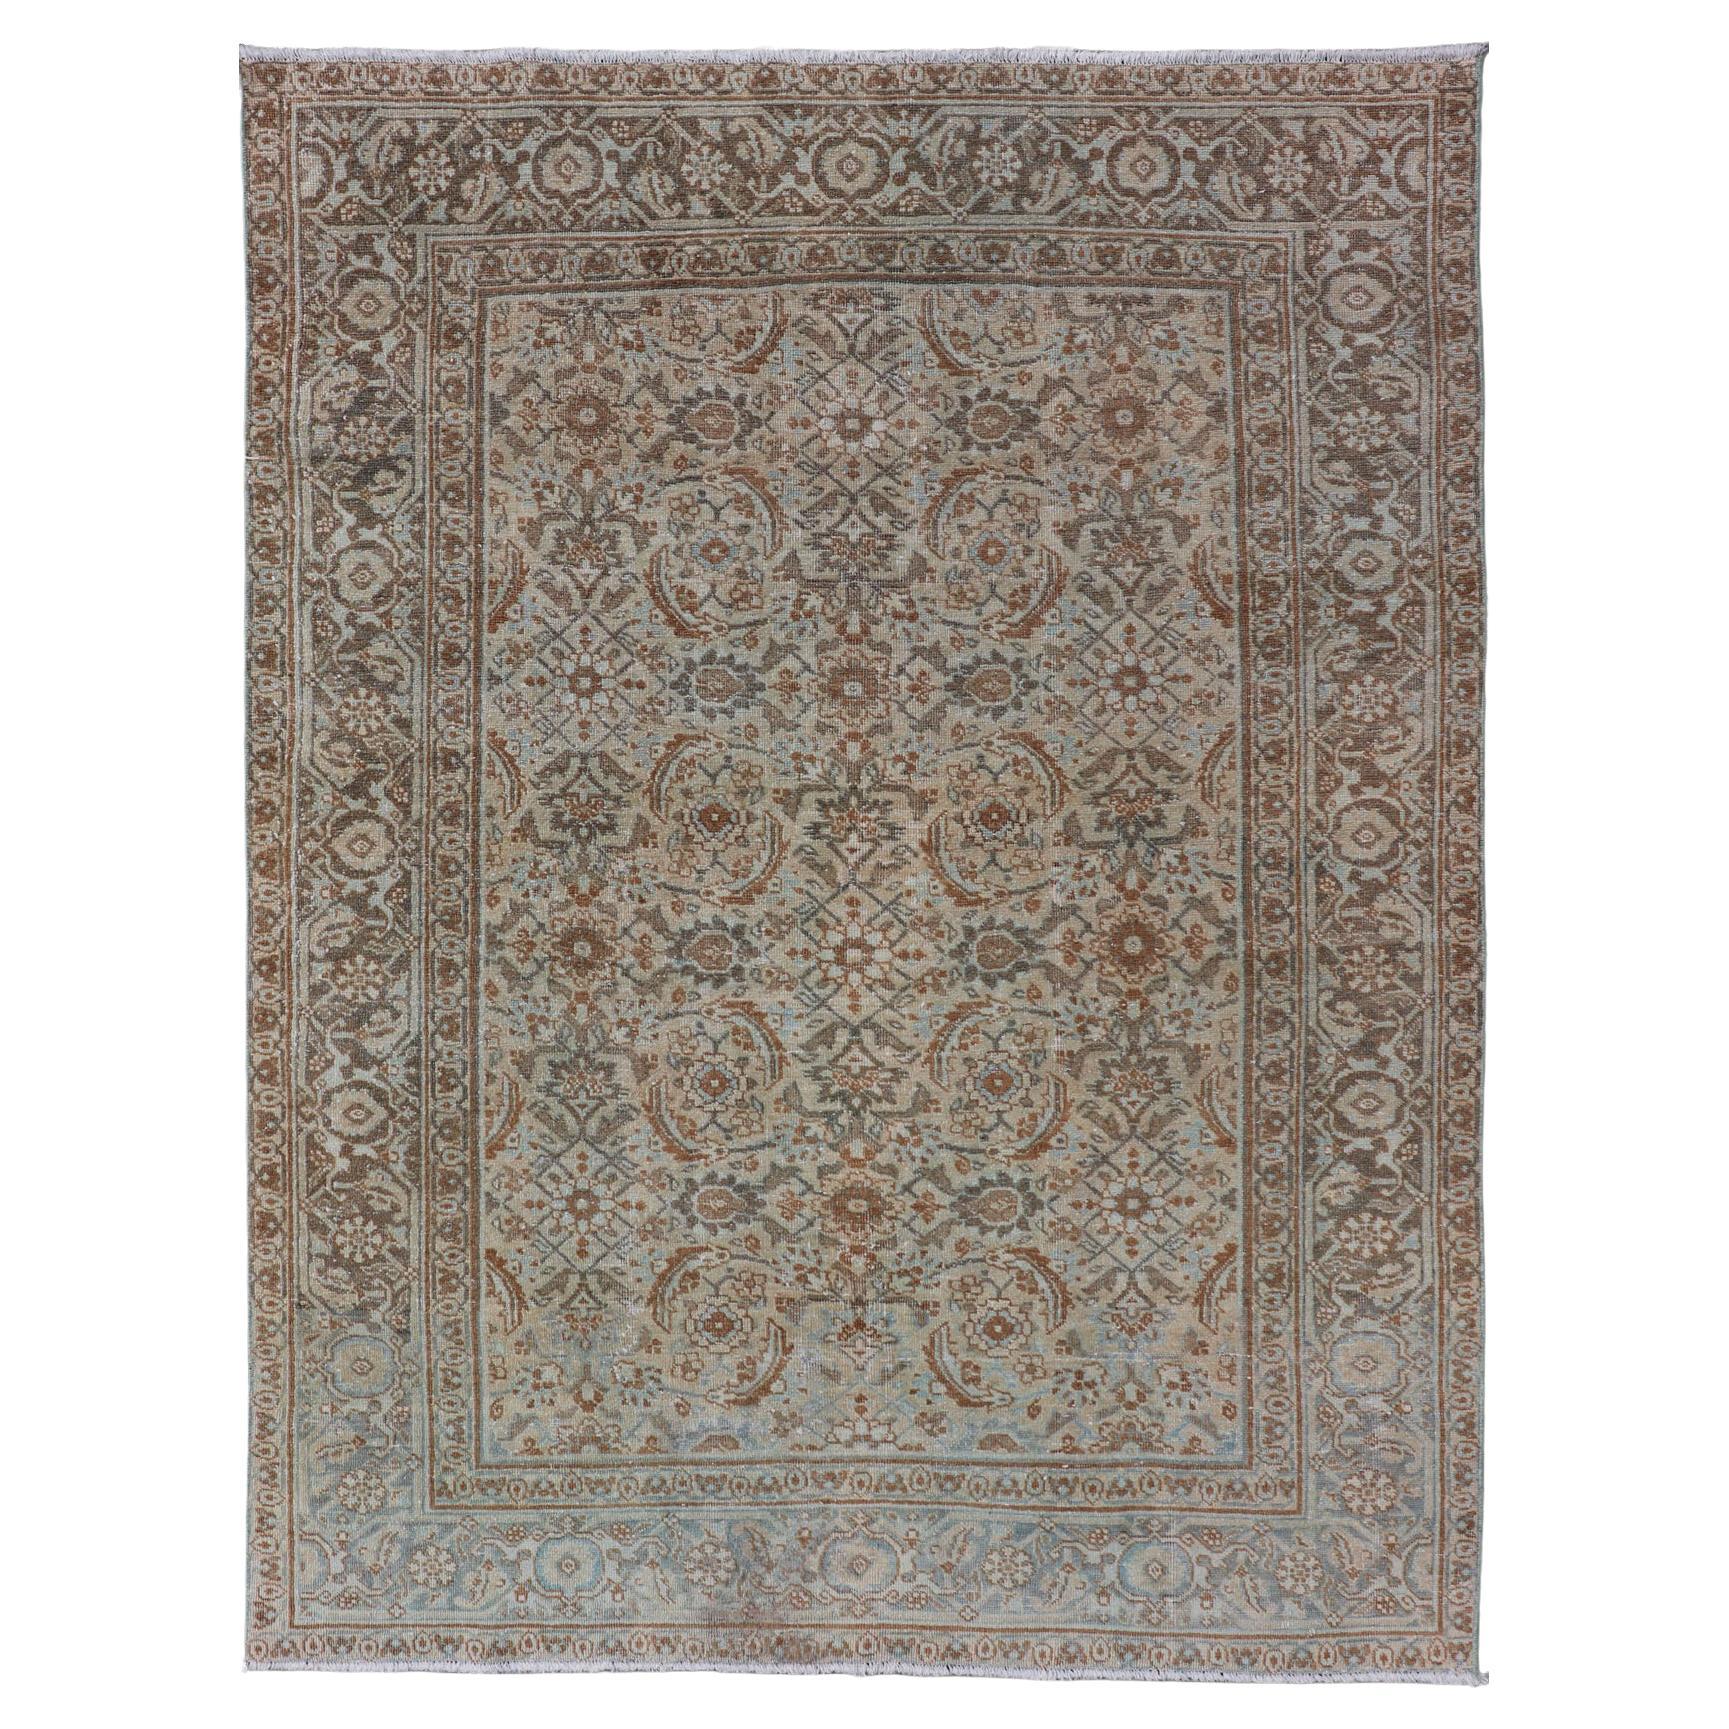 Antique Persian Tabriz Rug in Wool with All-Over Floral Design in Earth Colors For Sale